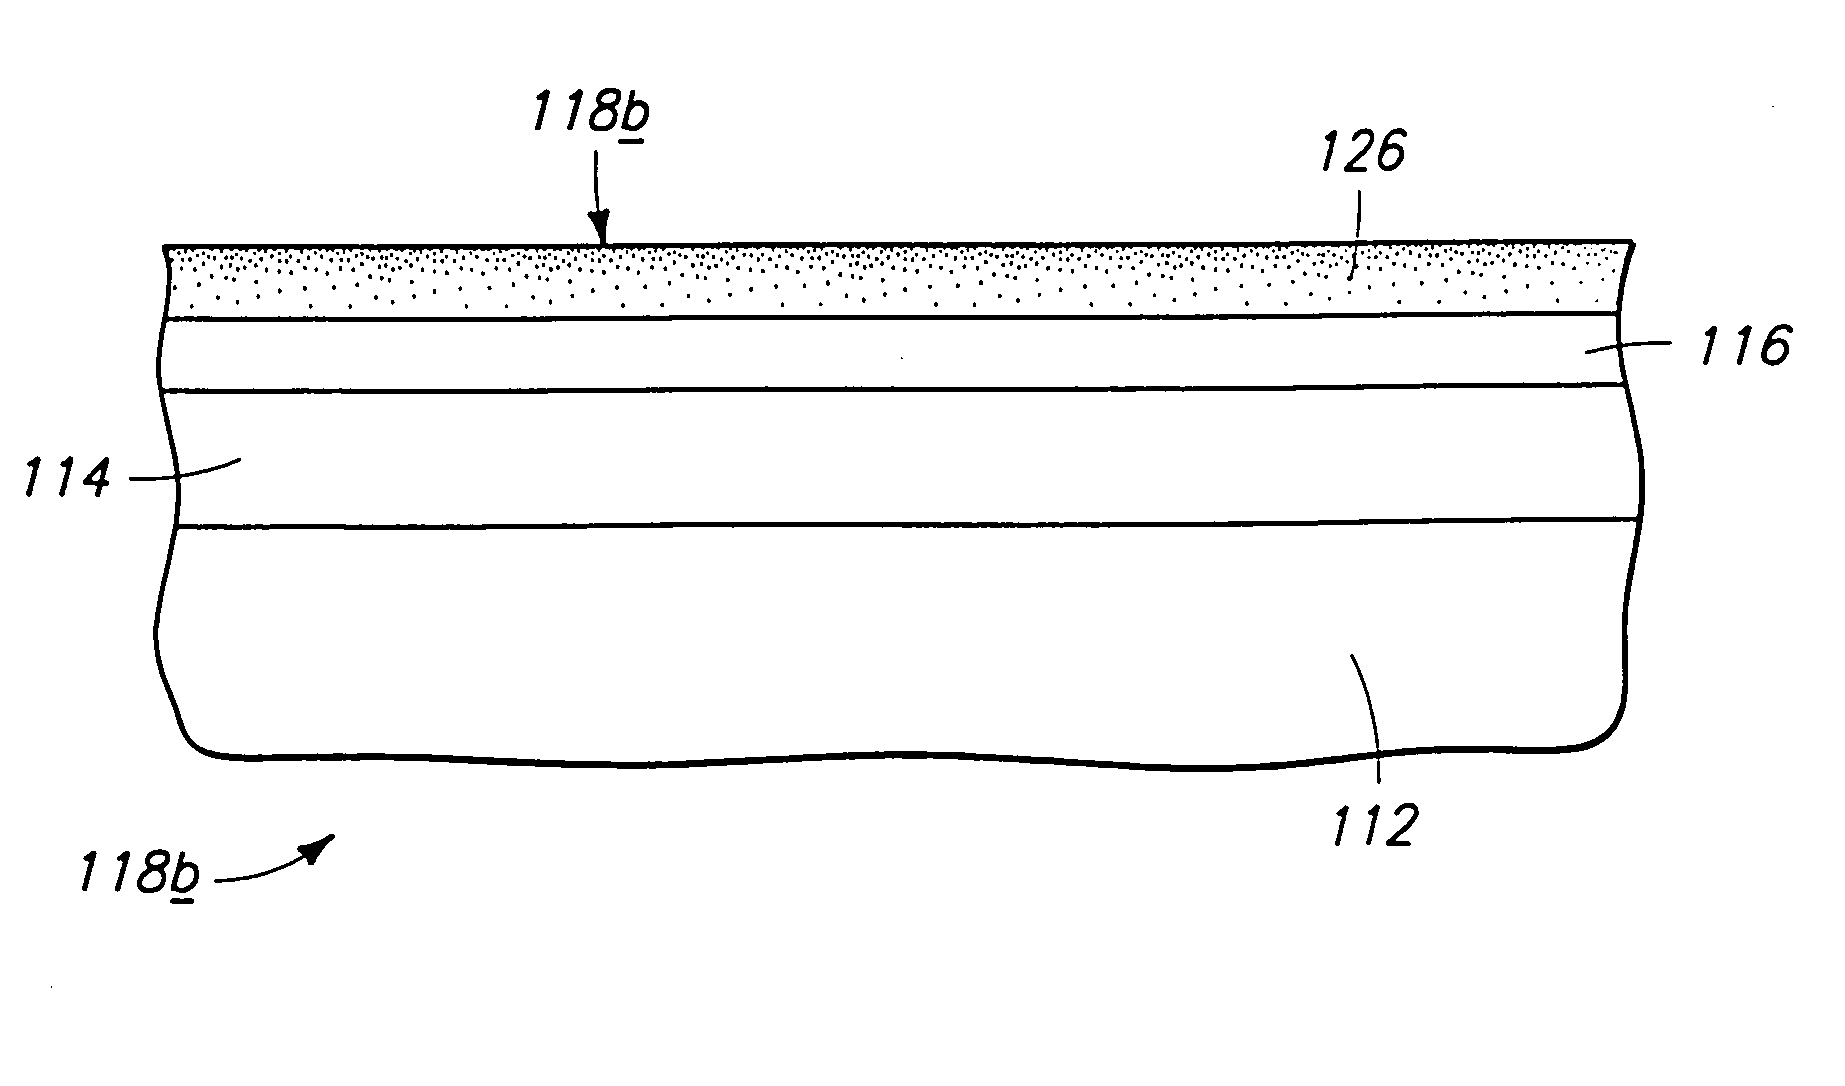 Chemical vapor deposition methods of forming barium strontium titanate comprising dielectric layers, including such layers having a varied concentration of barium and strontium within the layer